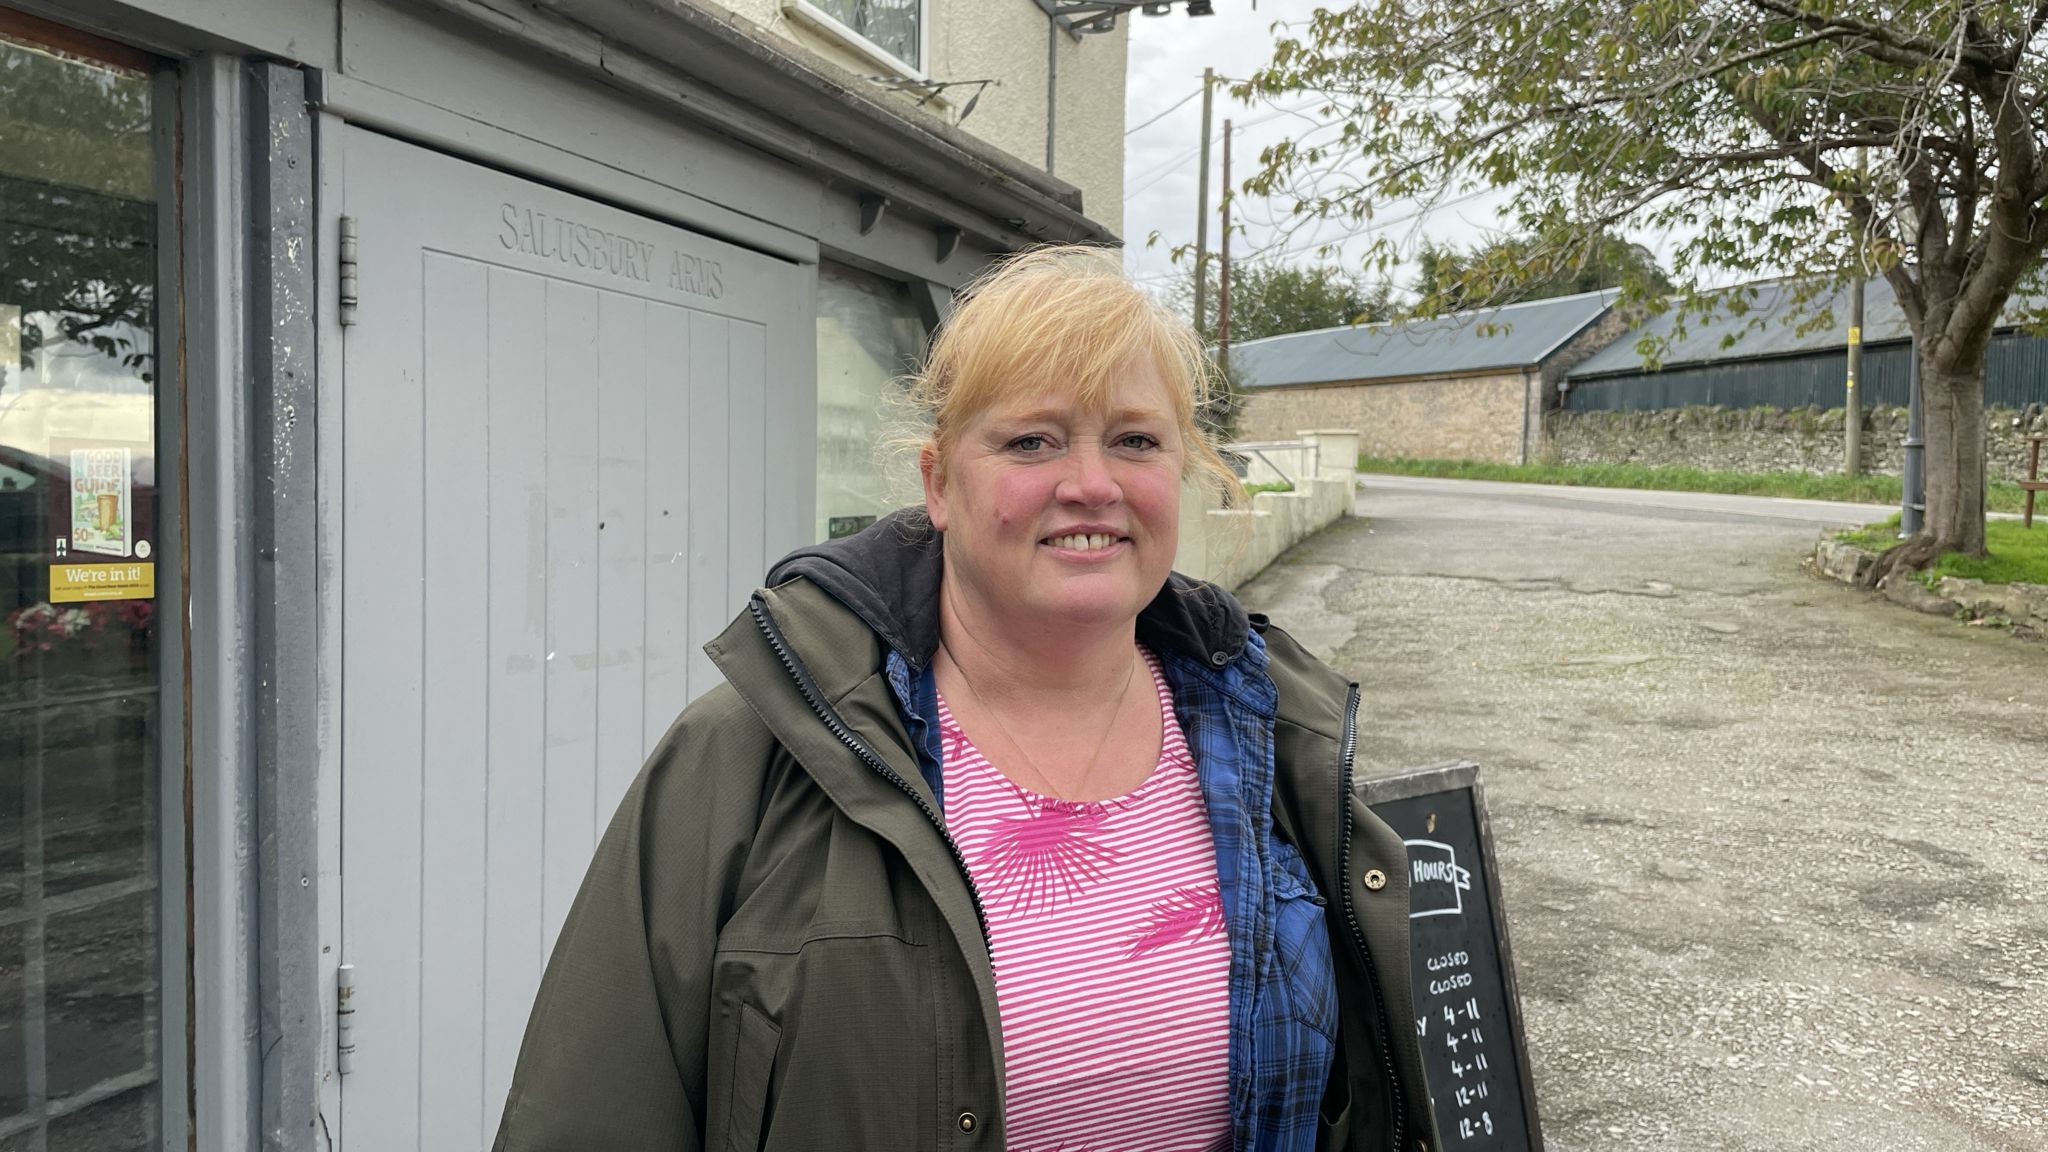 Jane Marsh stands outside the grey front door of the Salusbury Arms in Tremeirchian